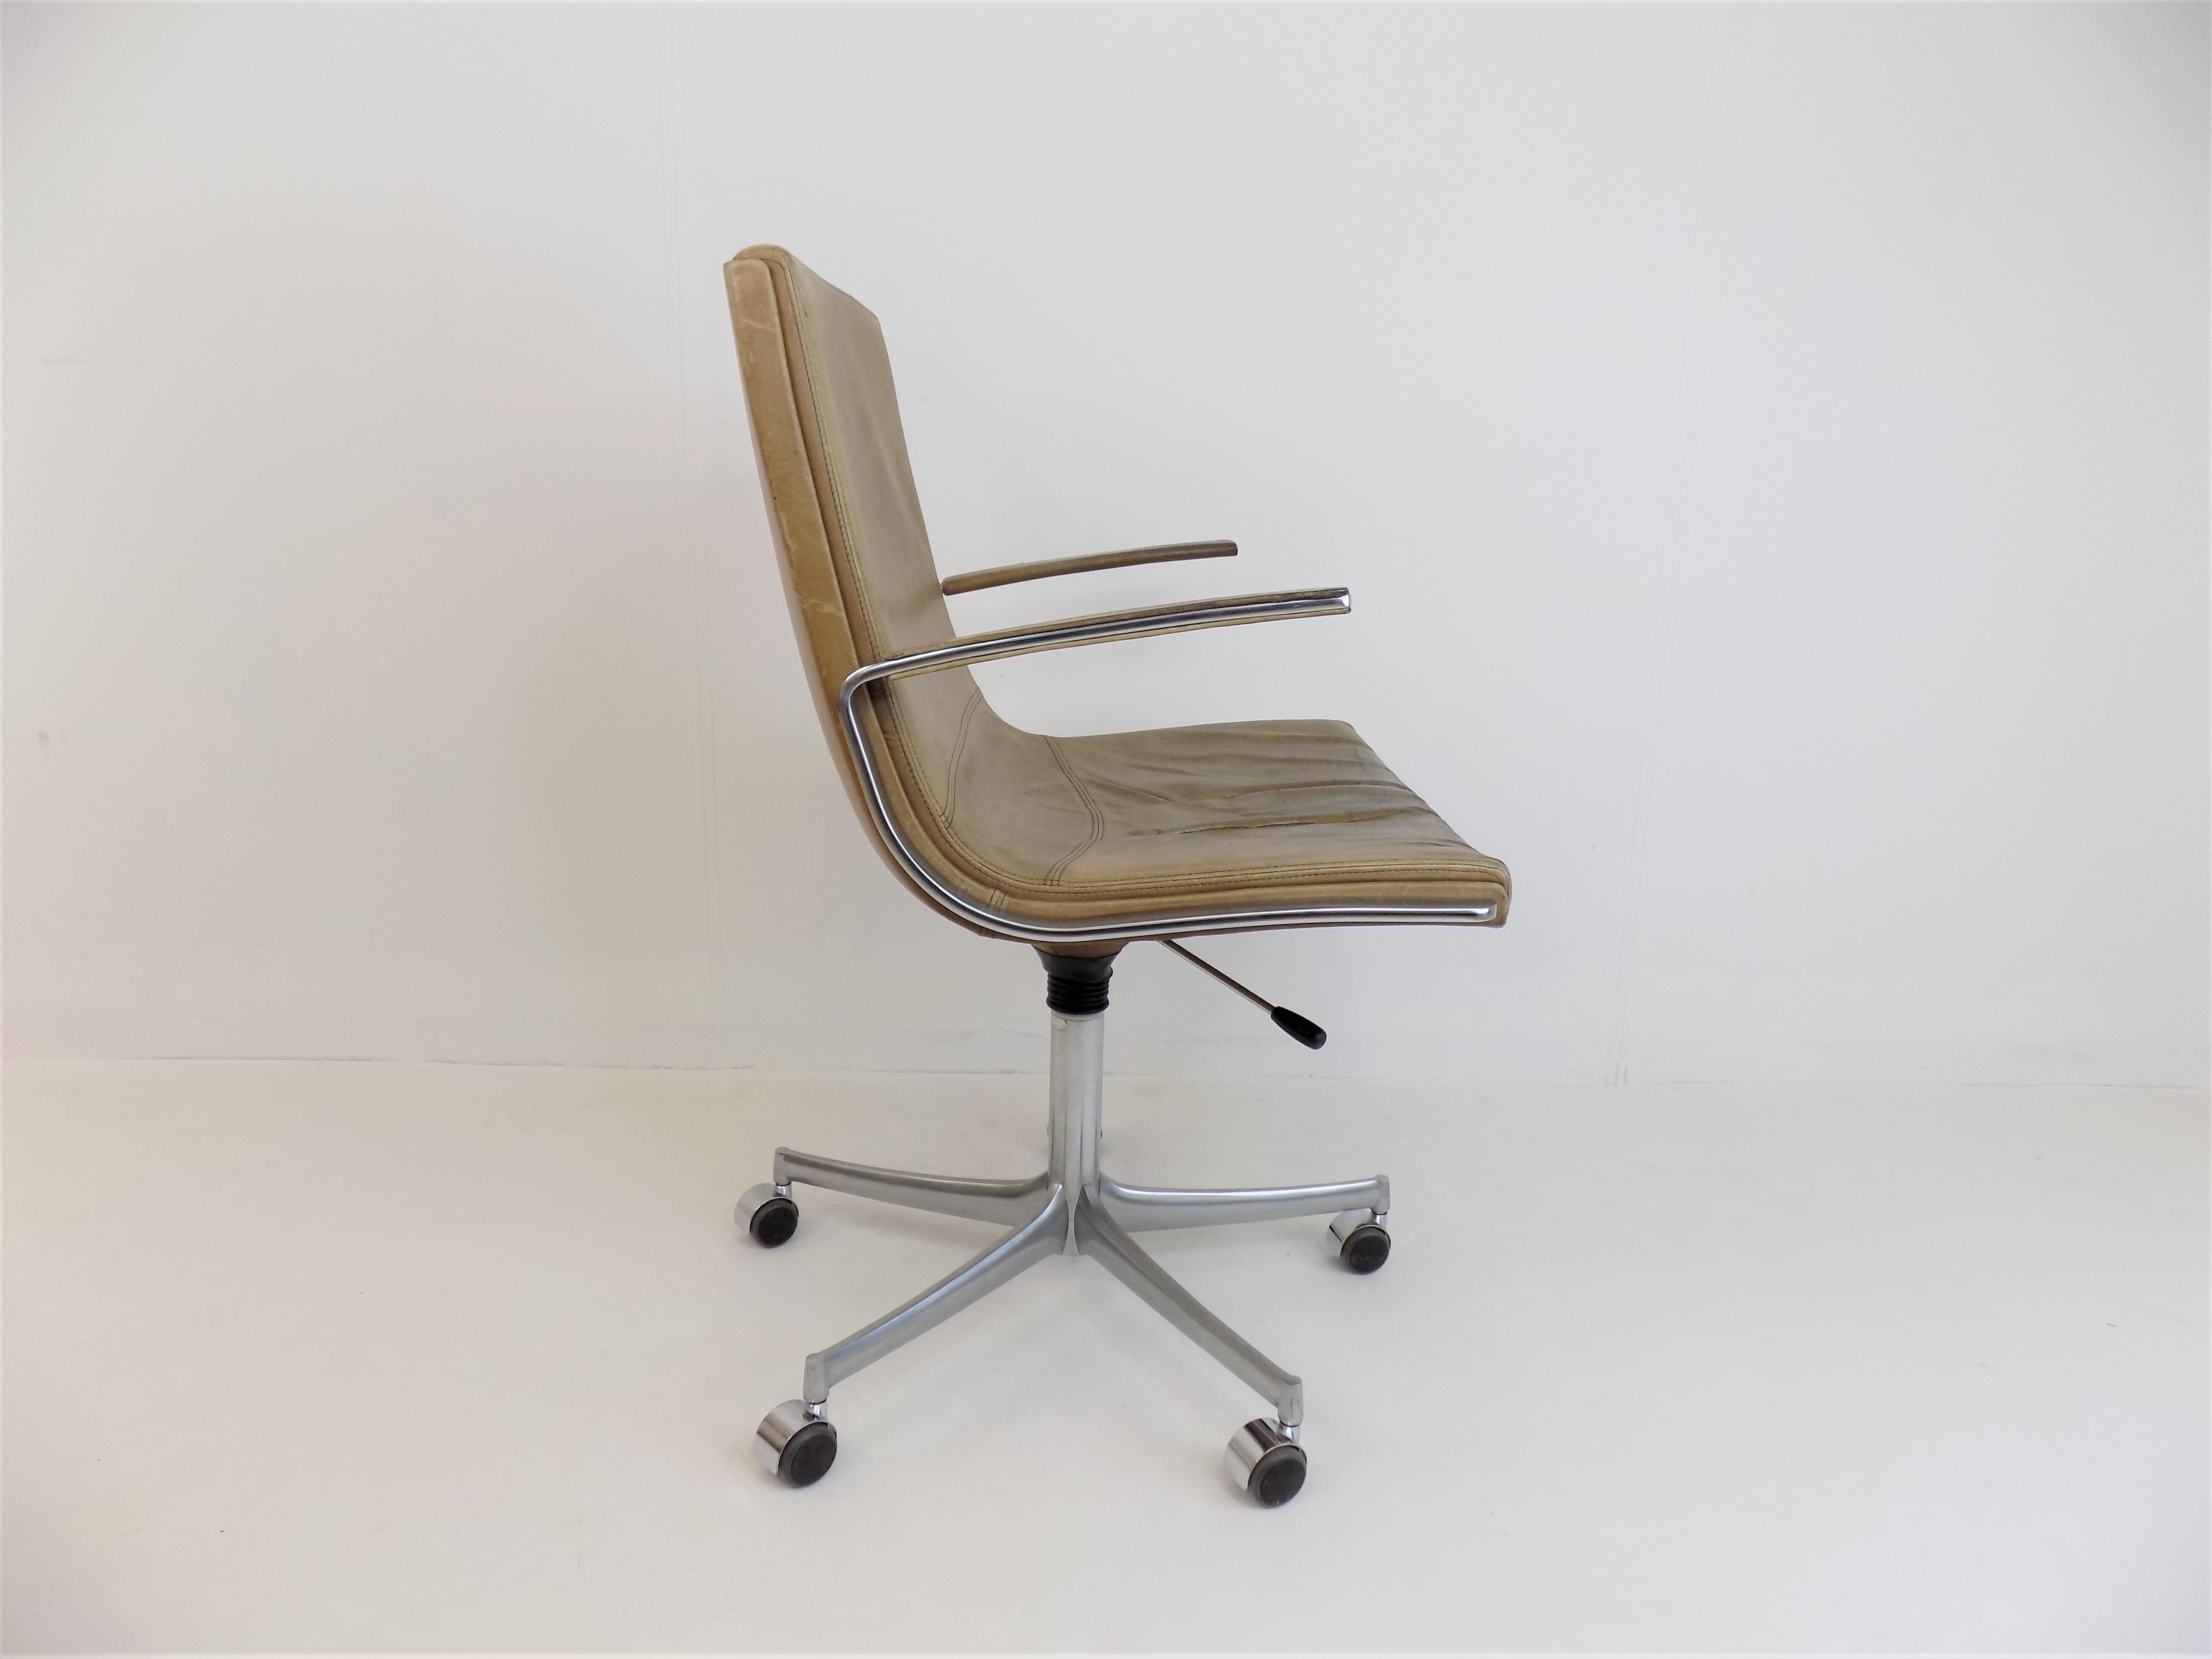 The Logos office chair in cognac-colored leather is in good condition. The leather is soft and shows a age-appropriate patina and signs of wear. The stainless steel armrests are in very good condition, as is the star base. The leather covering of